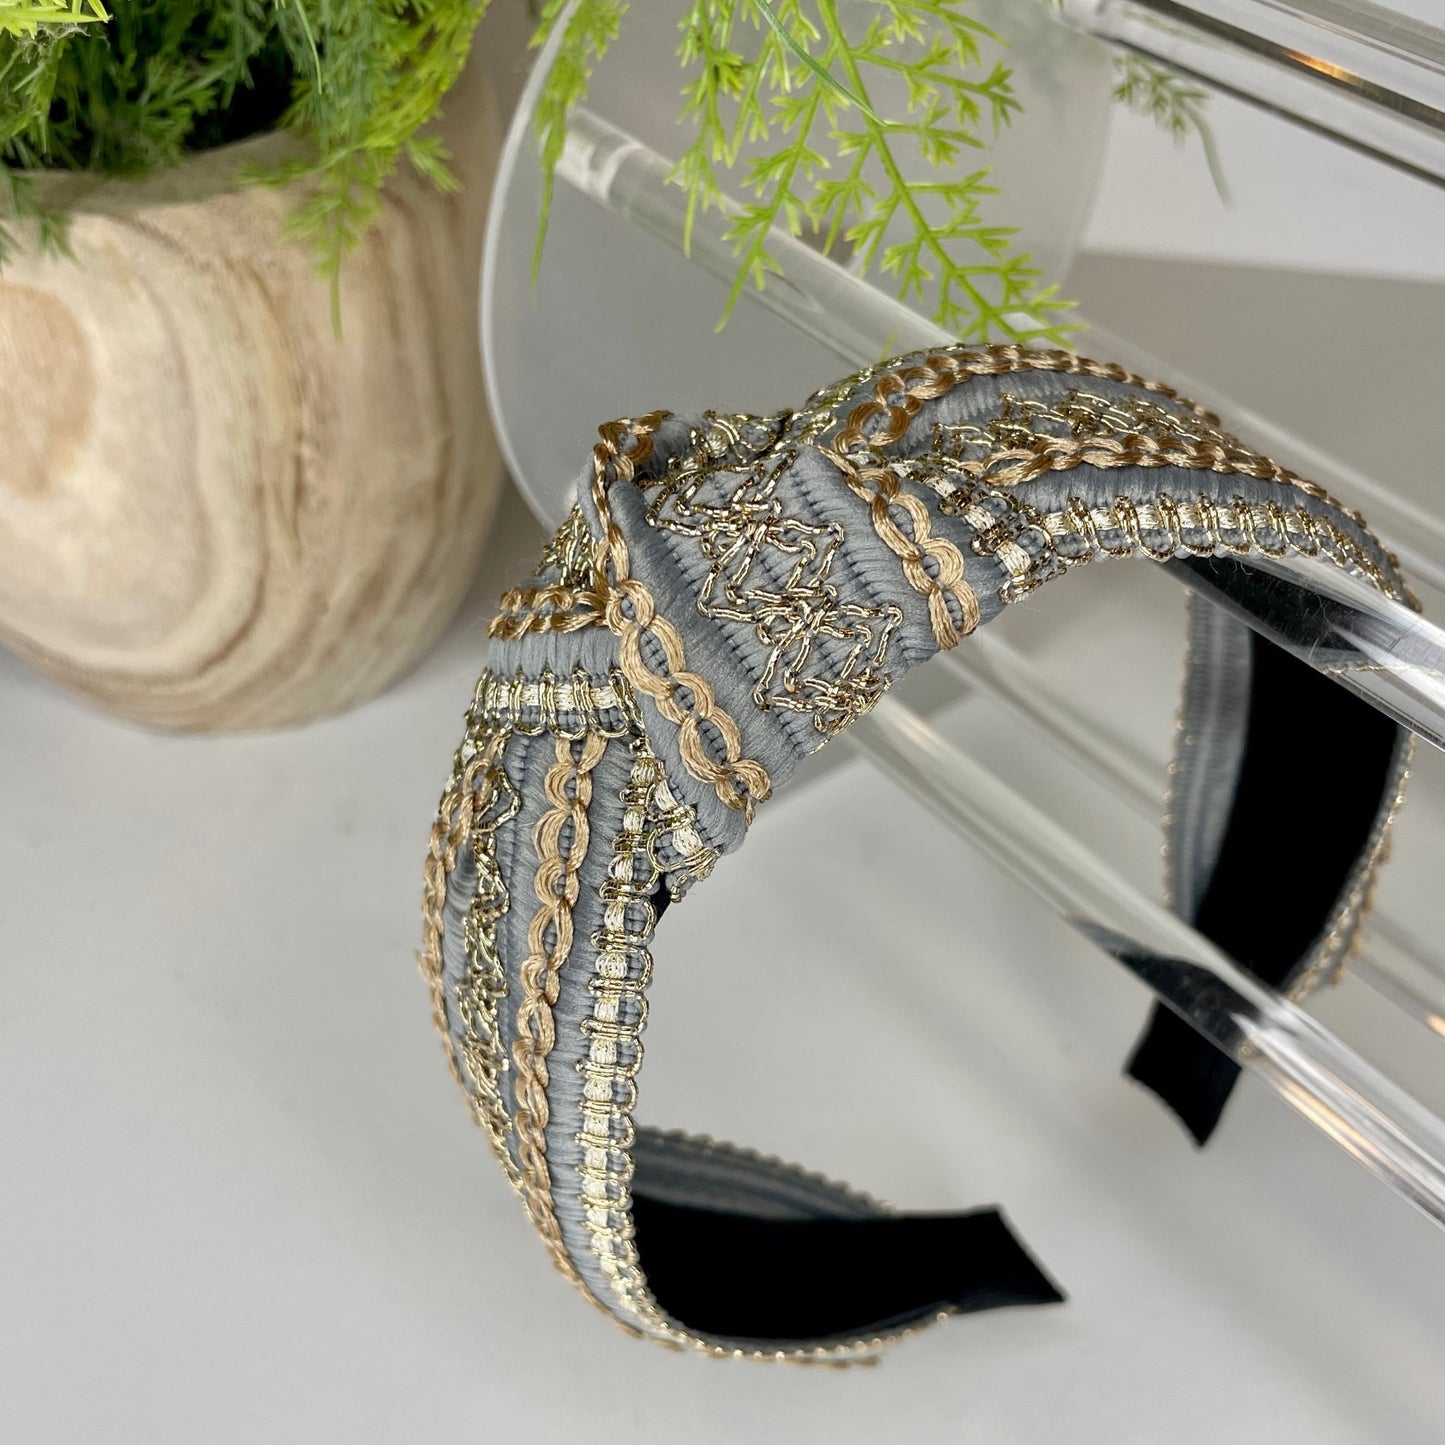 Silver with Gold Delicately Stitched Knot Headband - Gray Bird Label